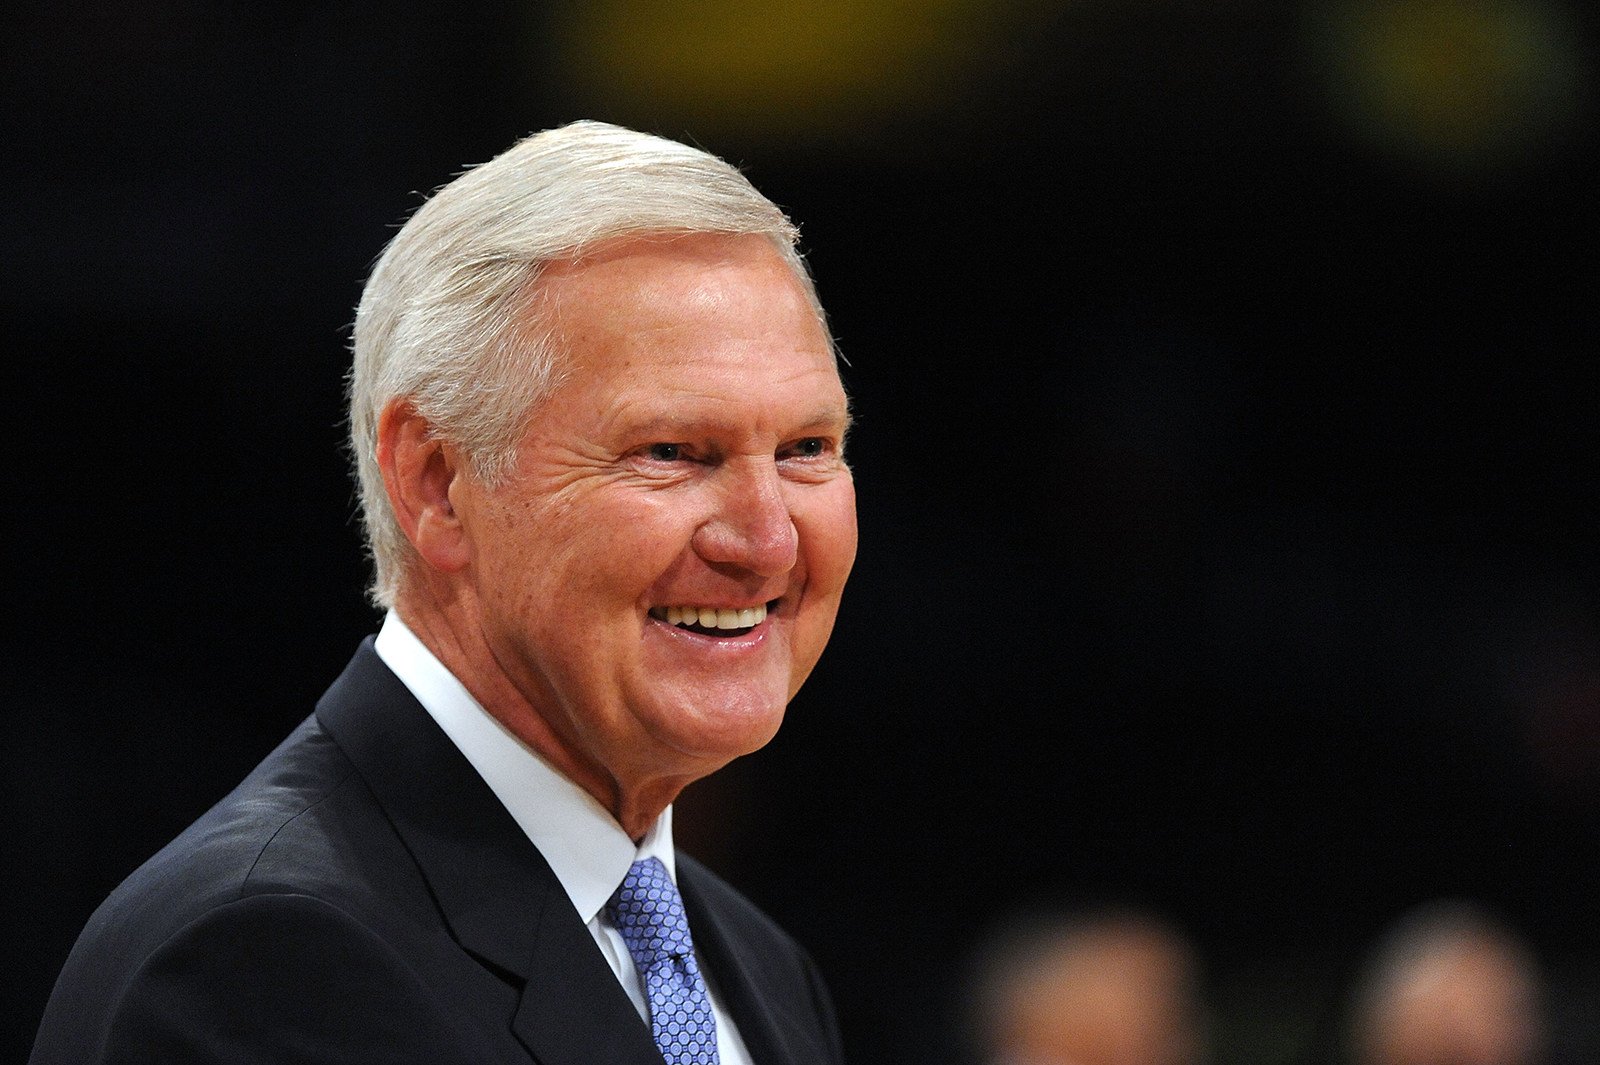 Former Lakers player and general manager Jerry West died on Wednesday morning at the age of 86. Photo: TNS